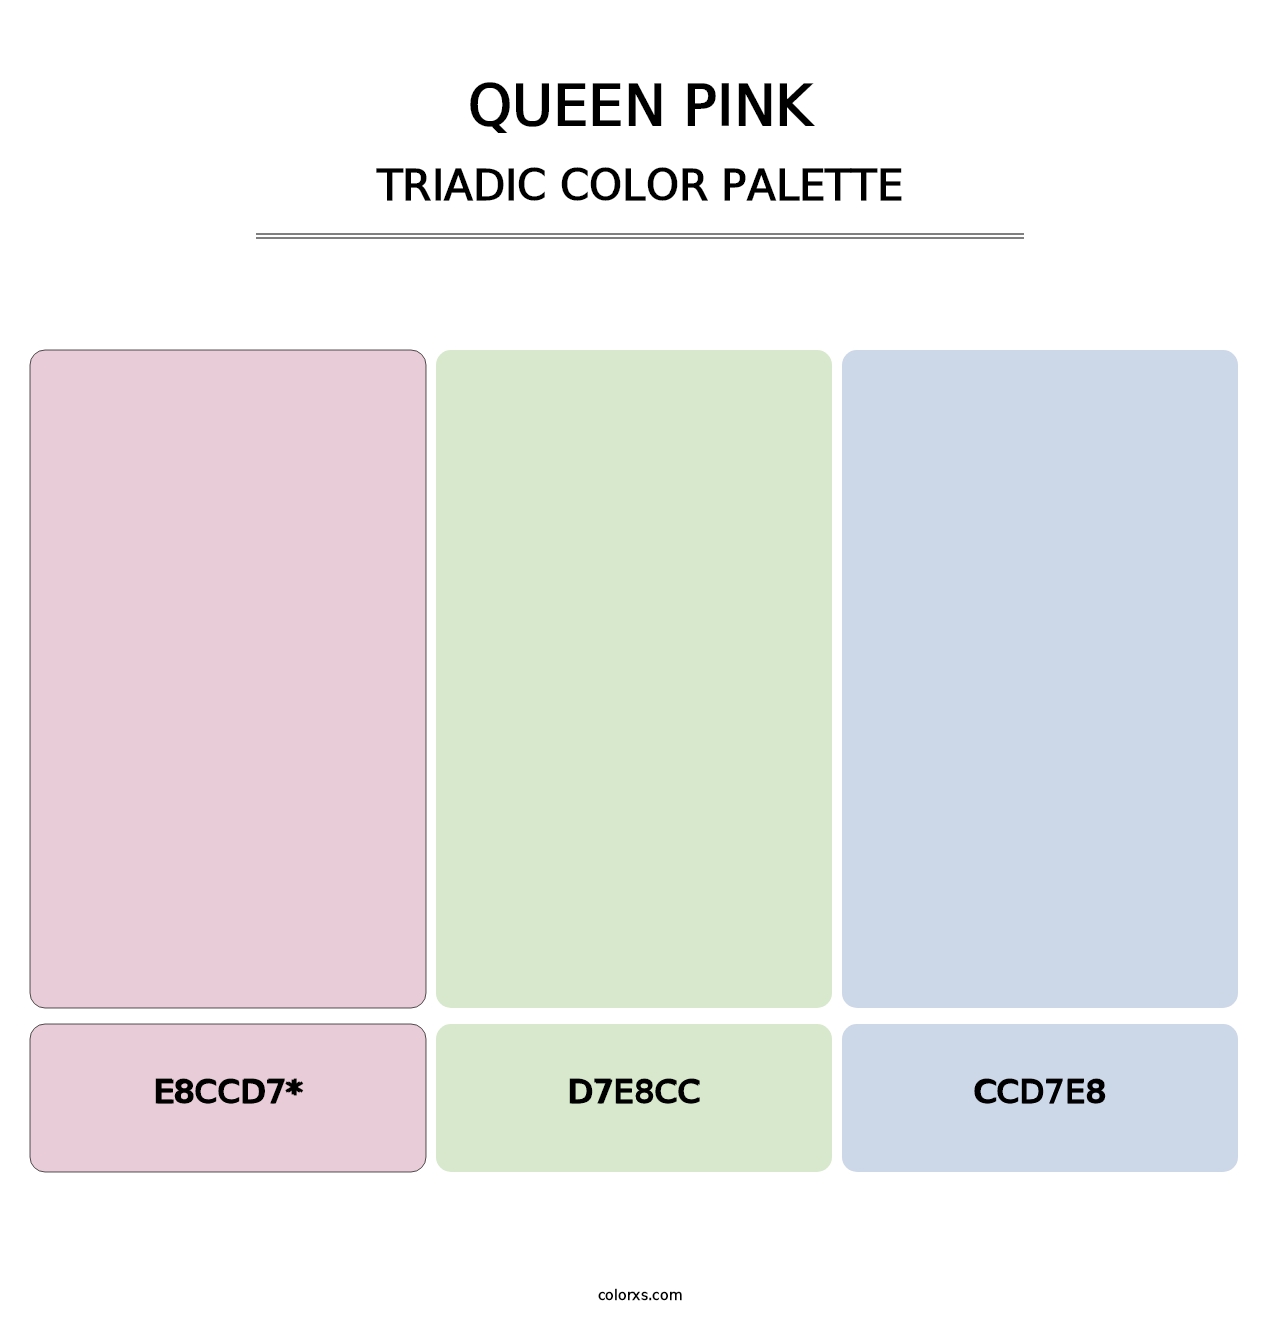 Queen Pink - Triadic Color Palette